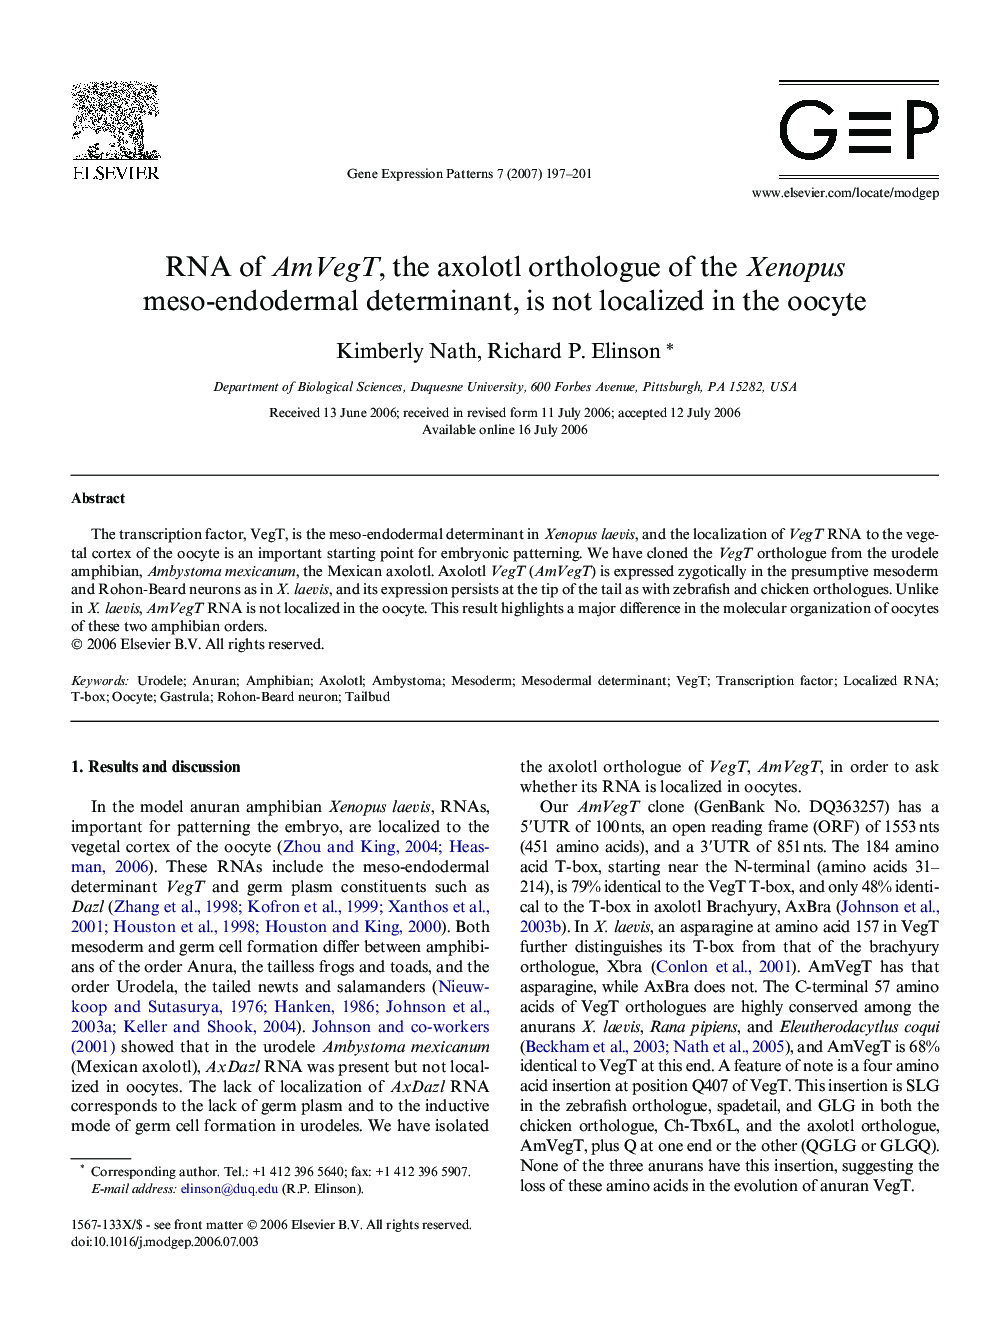 RNA of AmVegT, the axolotl orthologue of the Xenopus meso-endodermal determinant, is not localized in the oocyte